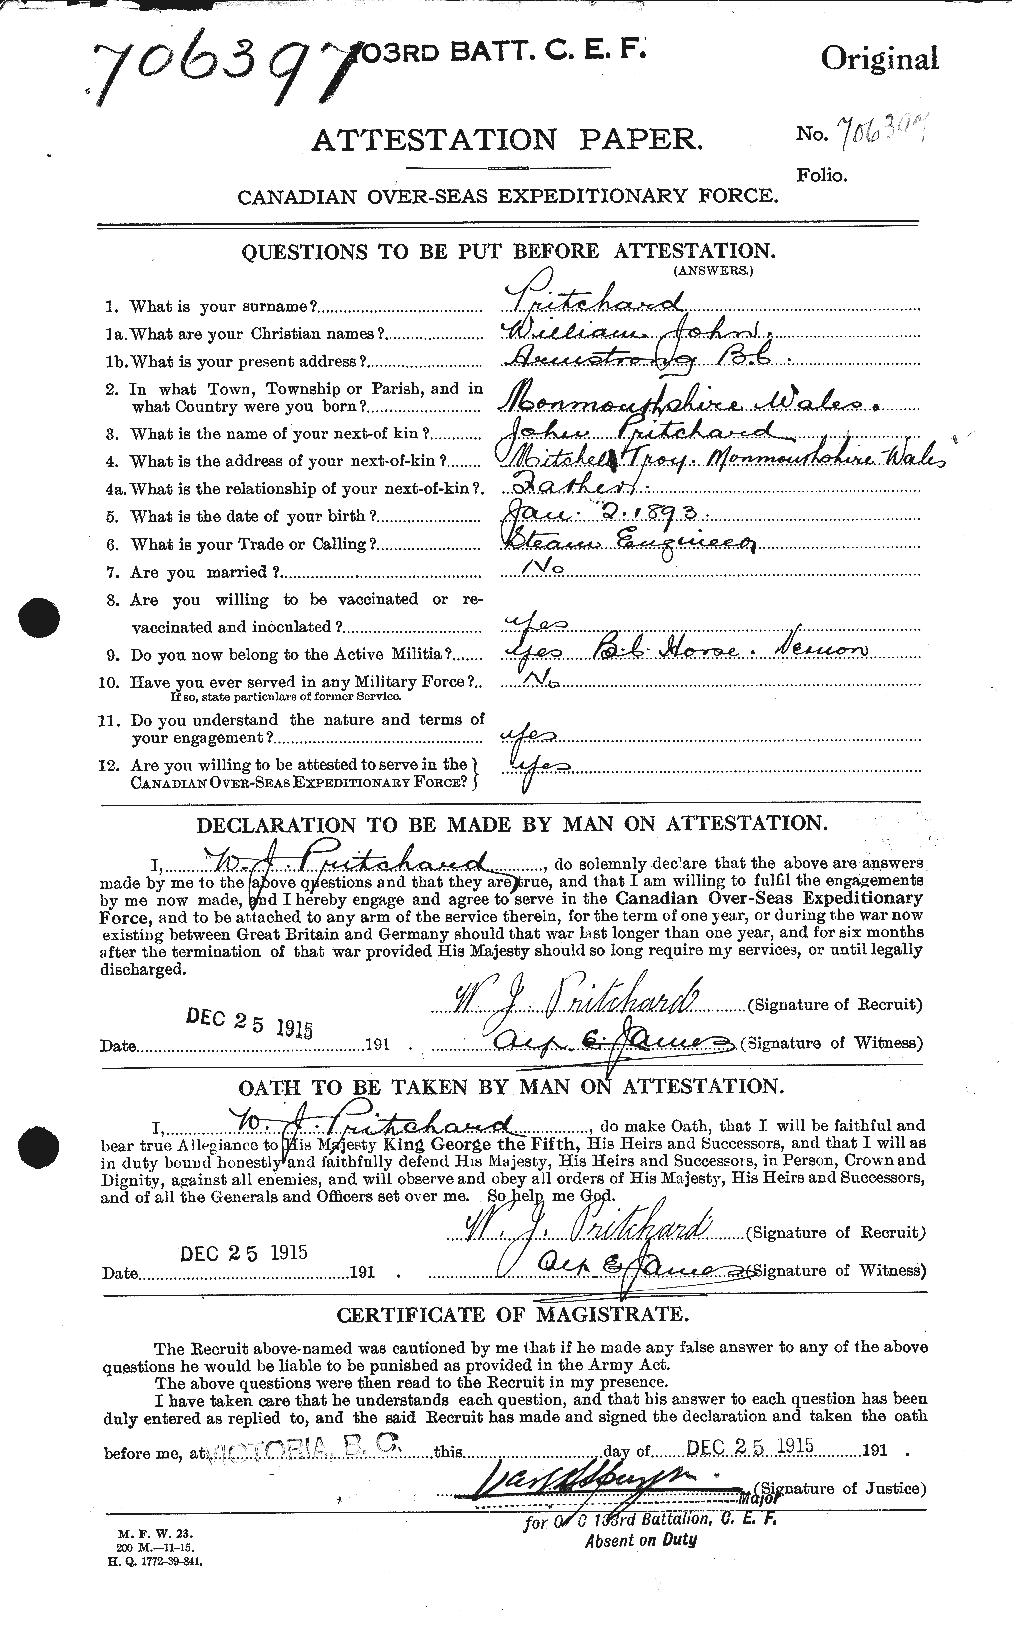 Personnel Records of the First World War - CEF 588630a